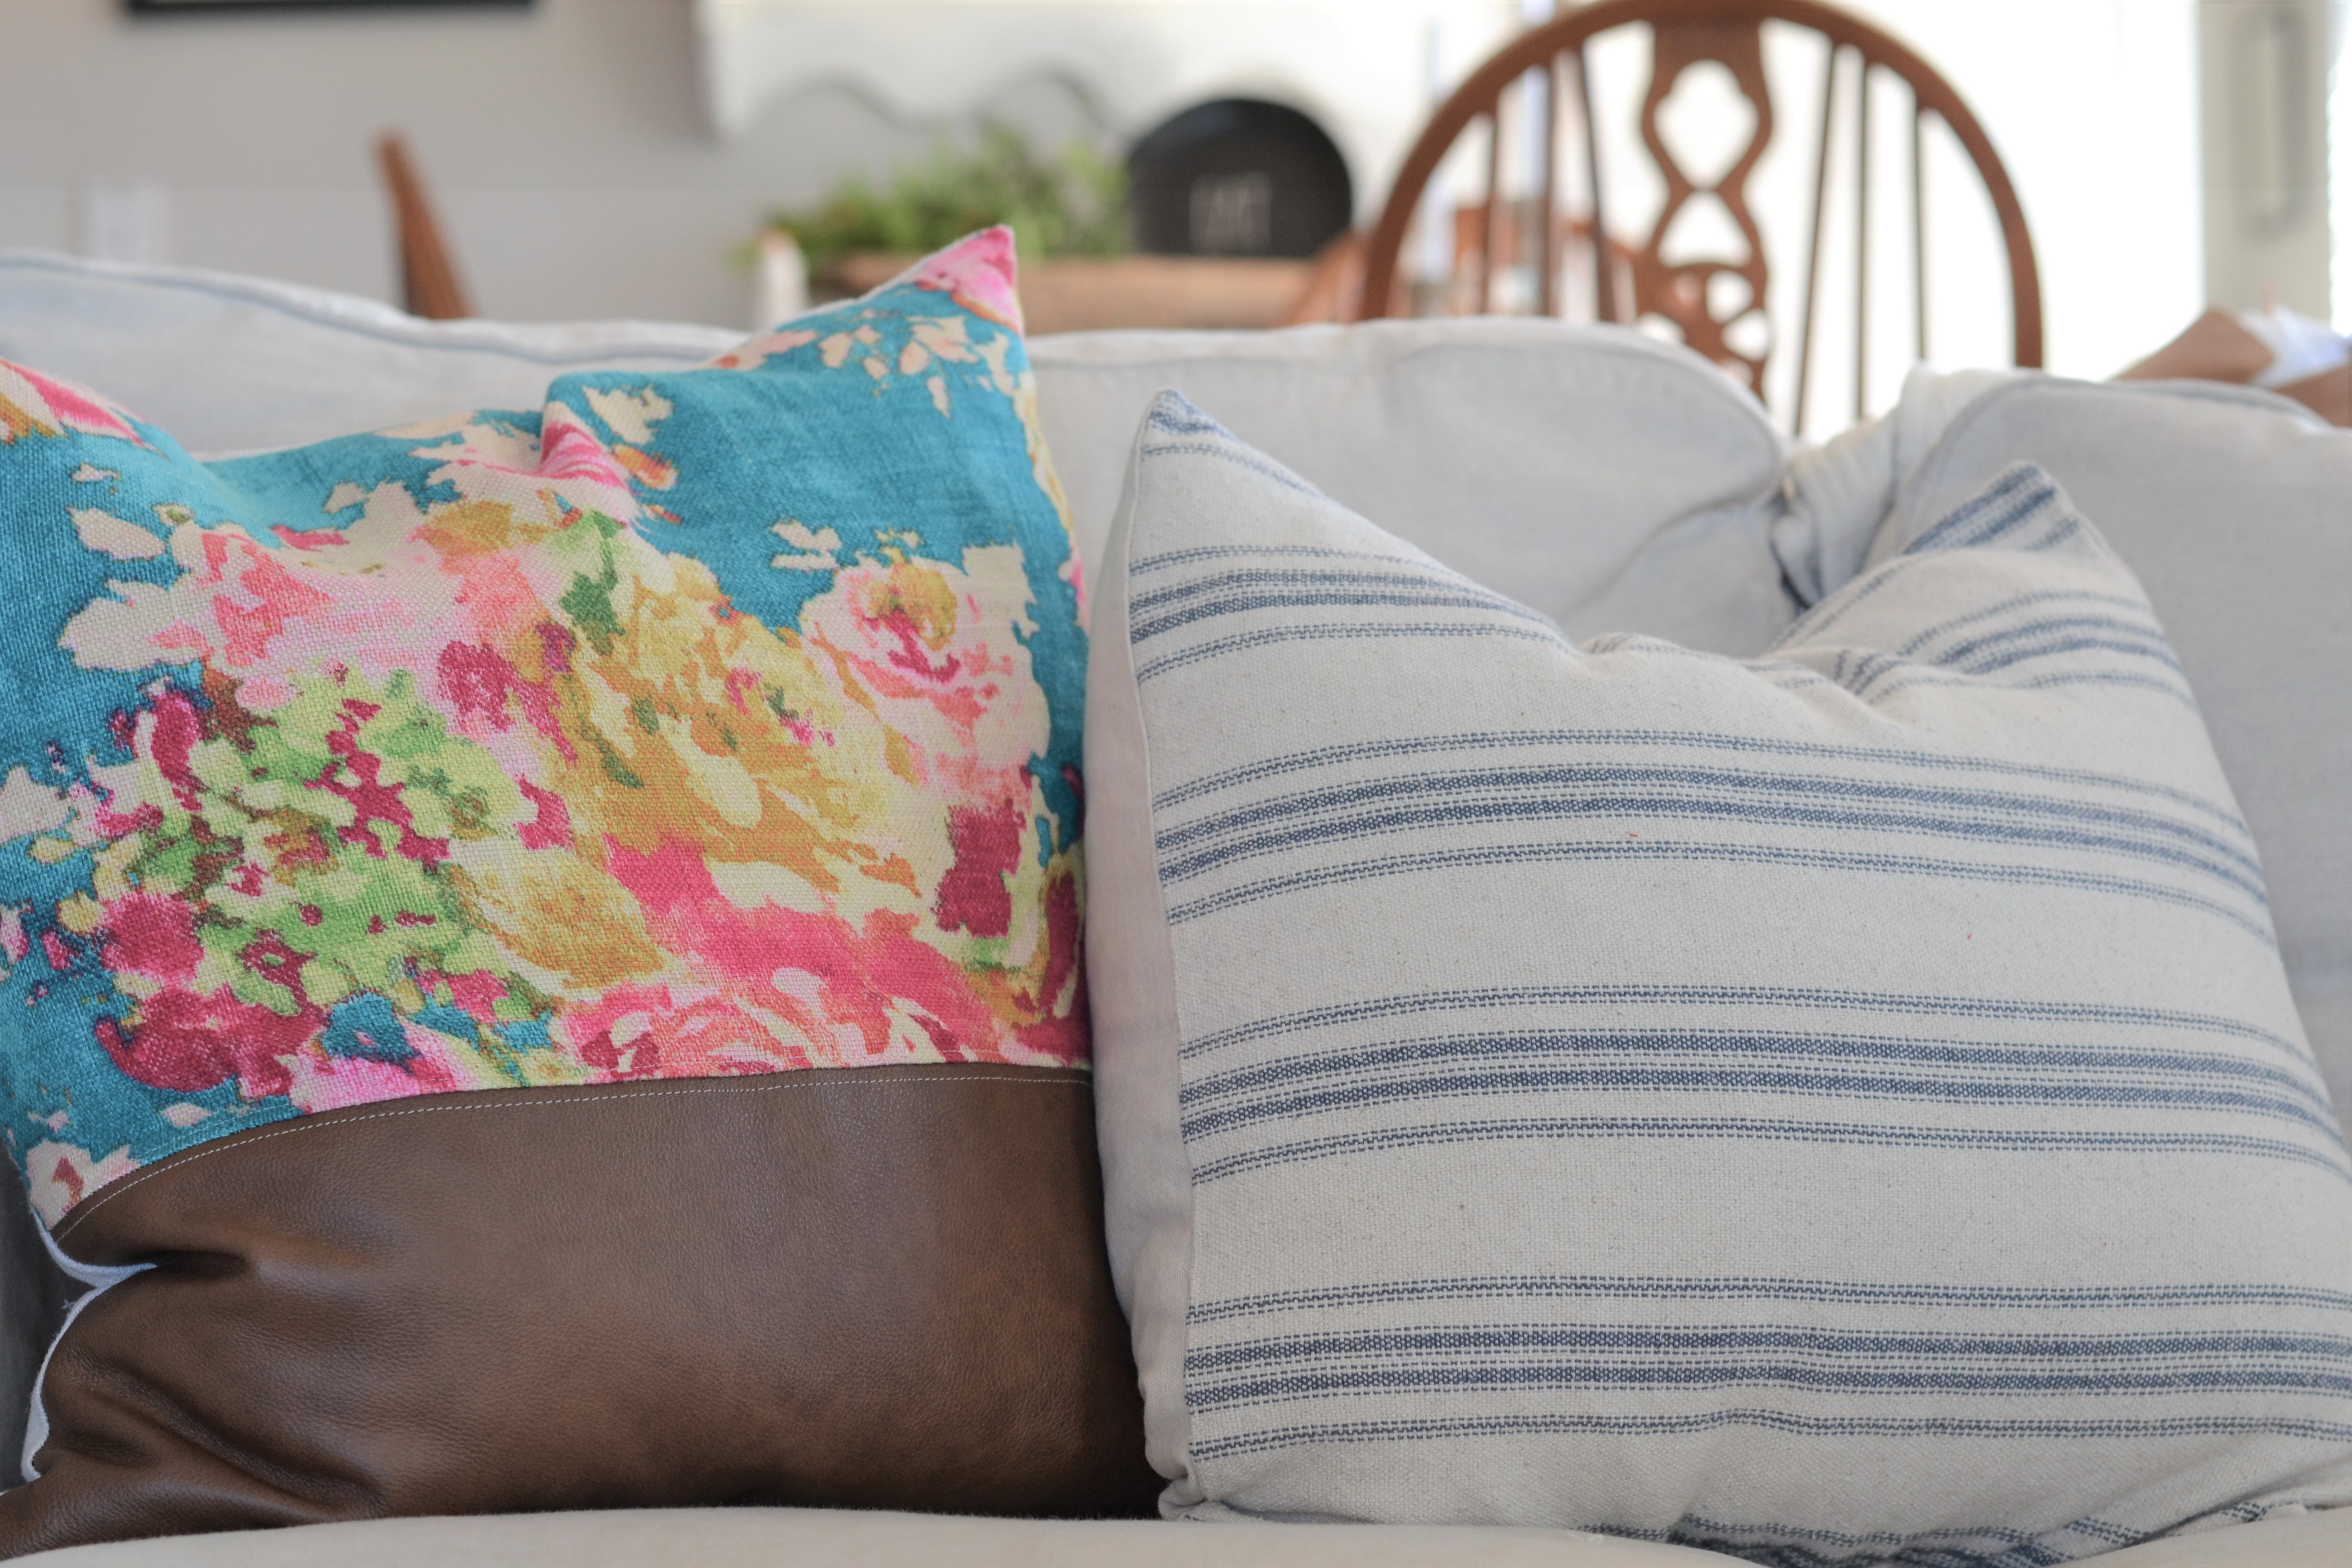 Using simple pillow covers to add Spring colors